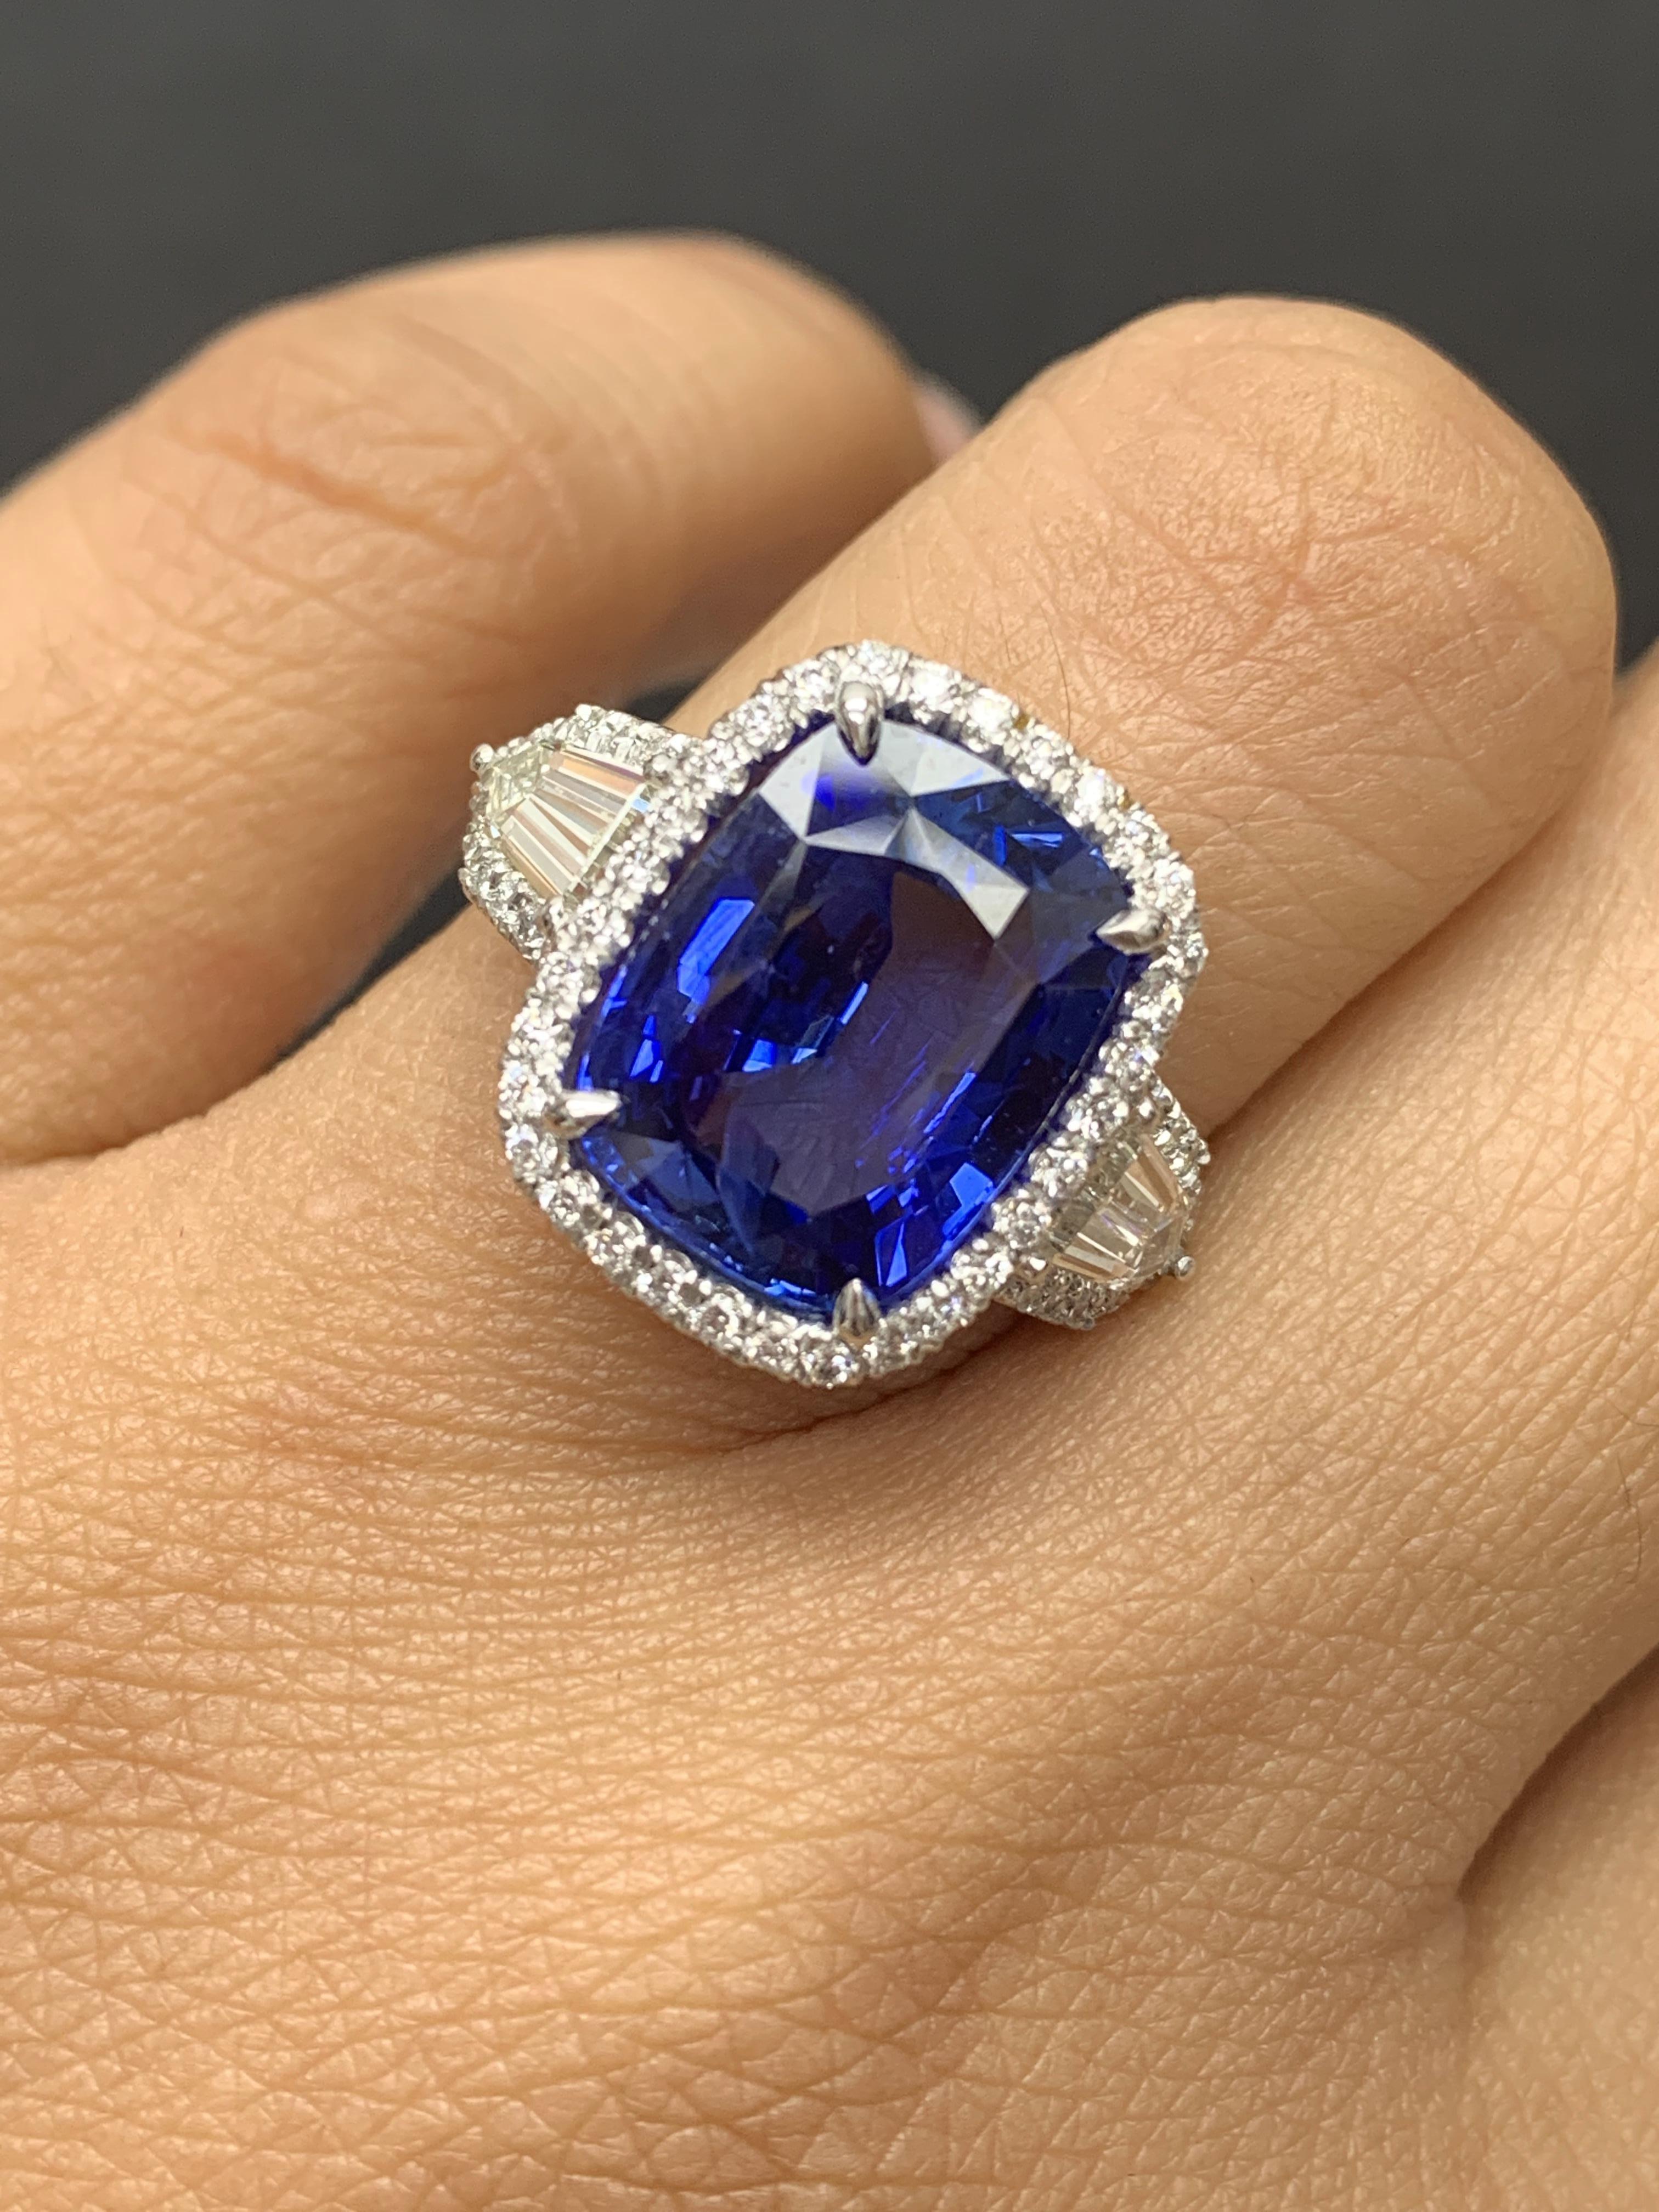 7.51 Carat Cushion Cut Sapphire and Diamond Engagement Ring in Platinum For Sale 7